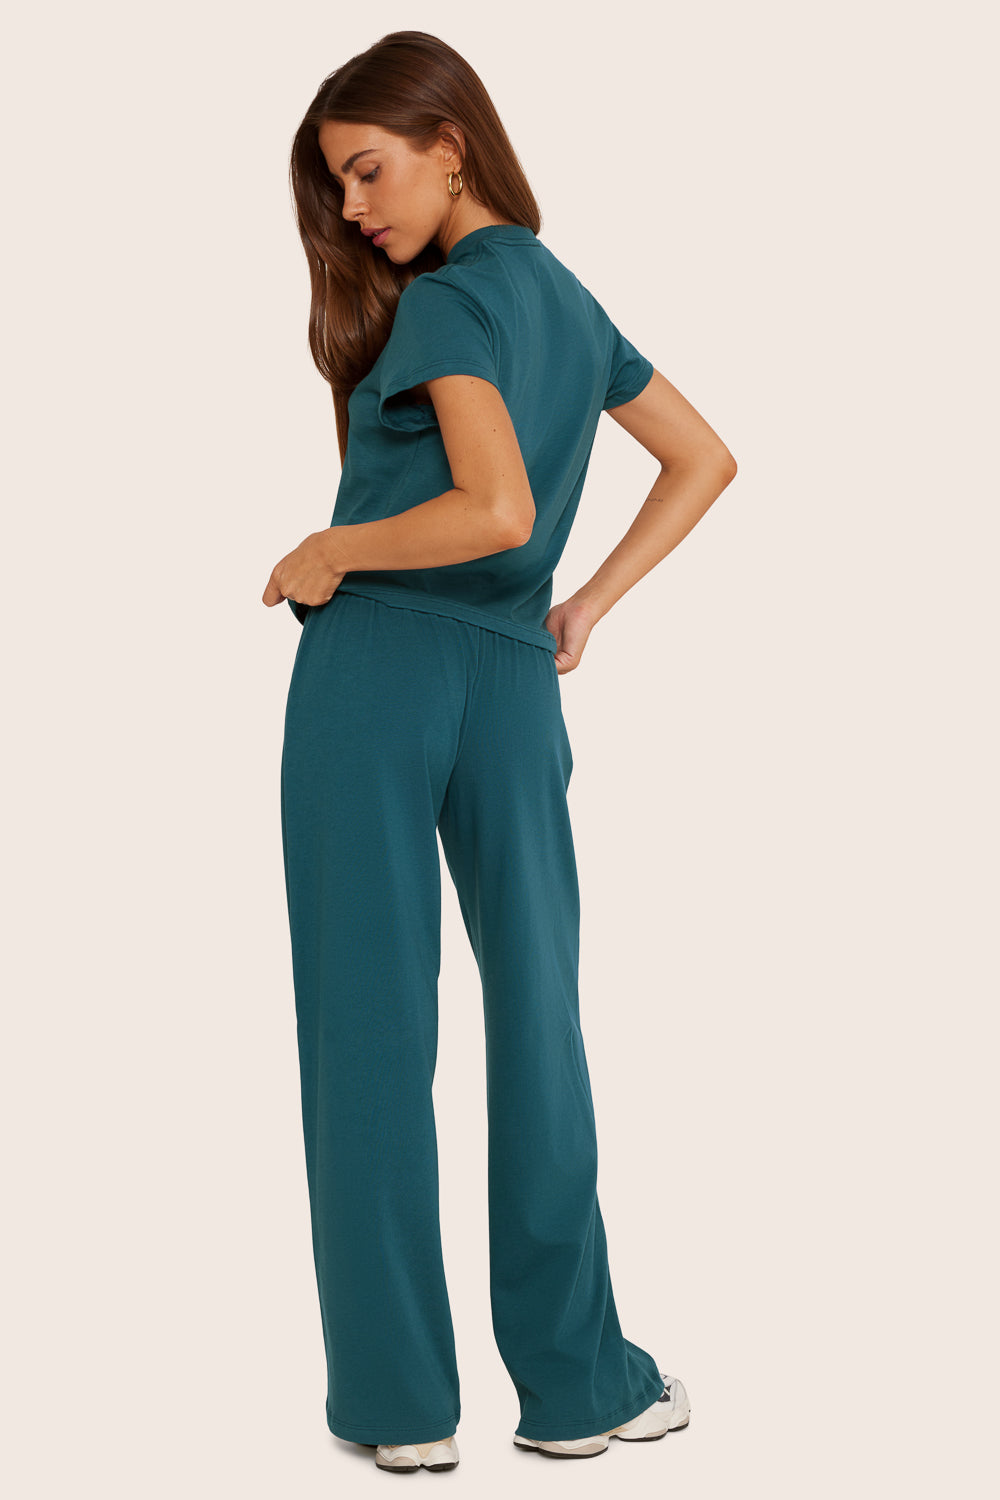 SET™ HEAVY COTTON EASY PANTS IN AGAVE